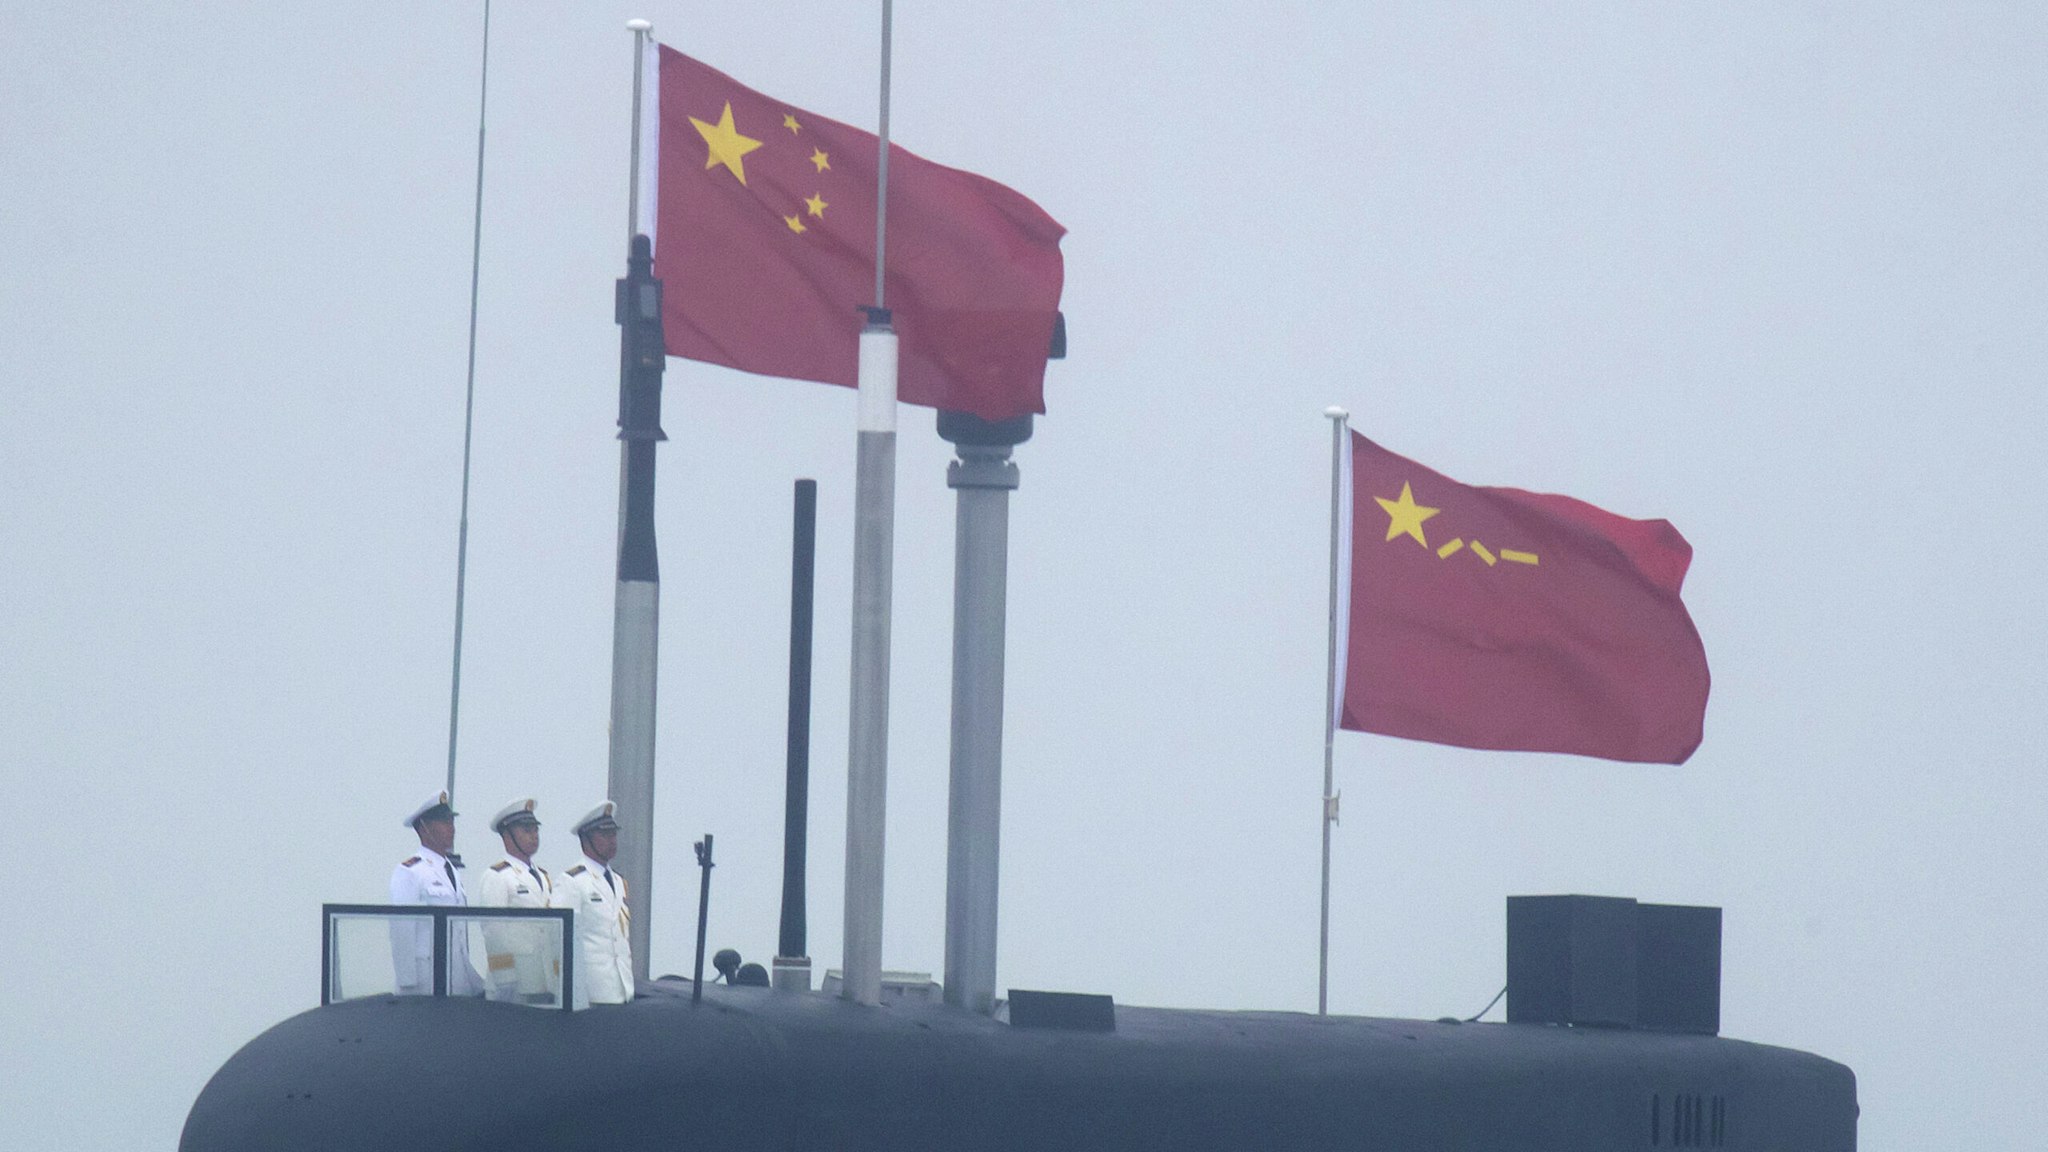 A new type 094A Jin-class nuclear submarine Long March 10 of the Chinese People's Liberation Army (PLA) Navy participates in a naval parade to commemorate the 70th anniversary of the founding of China's PLA Navy in the sea near Qingdao, in eastern China's Shandong province on April 23, 2019. - China celebrated the 70th anniversary of its navy by showing off its growing fleet in a sea parade featuring a brand new guided-missile destroyer.